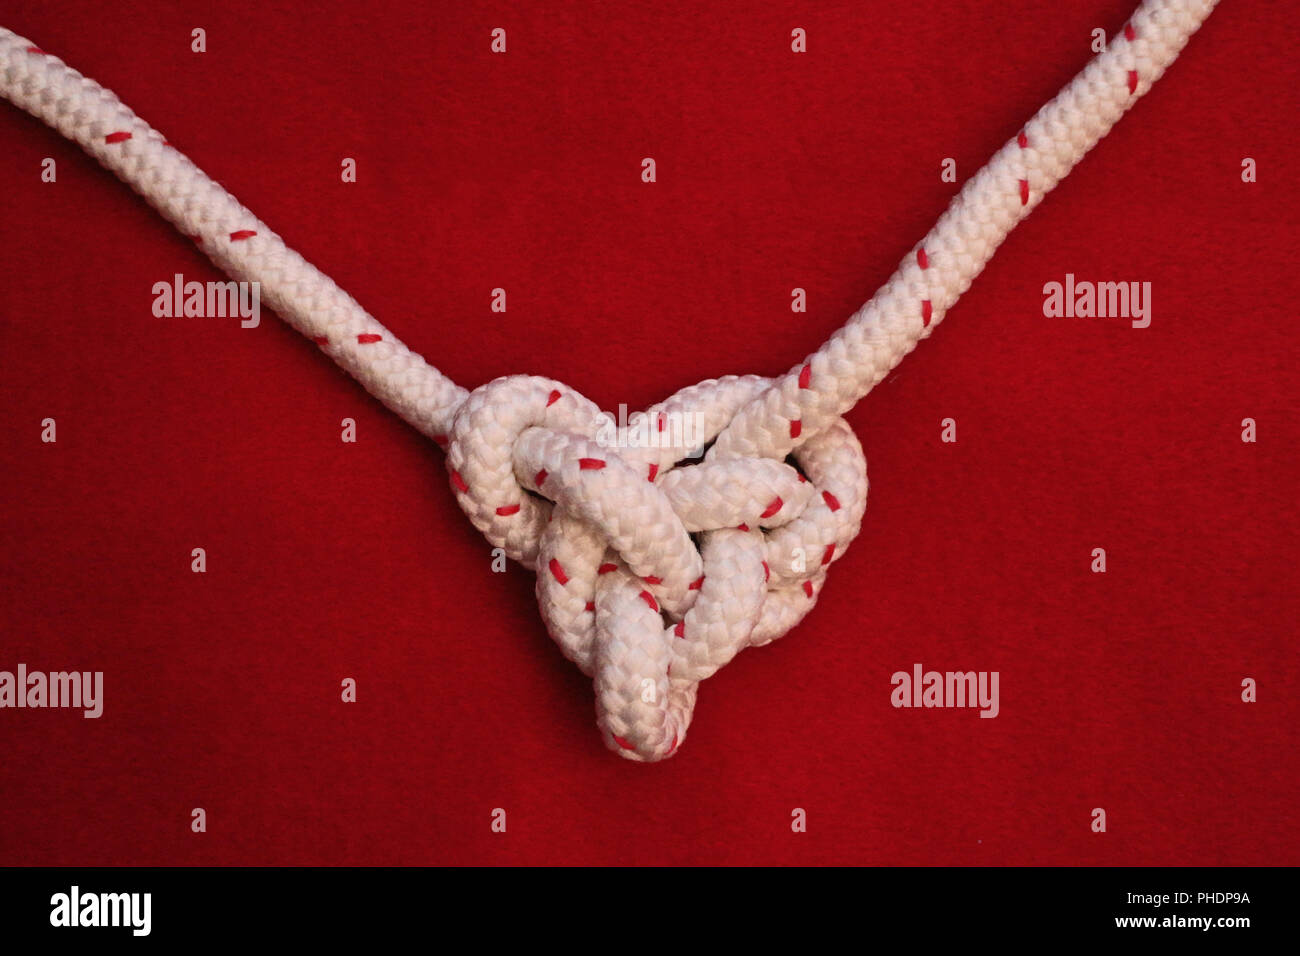 White rope knot on red background Stock Photo